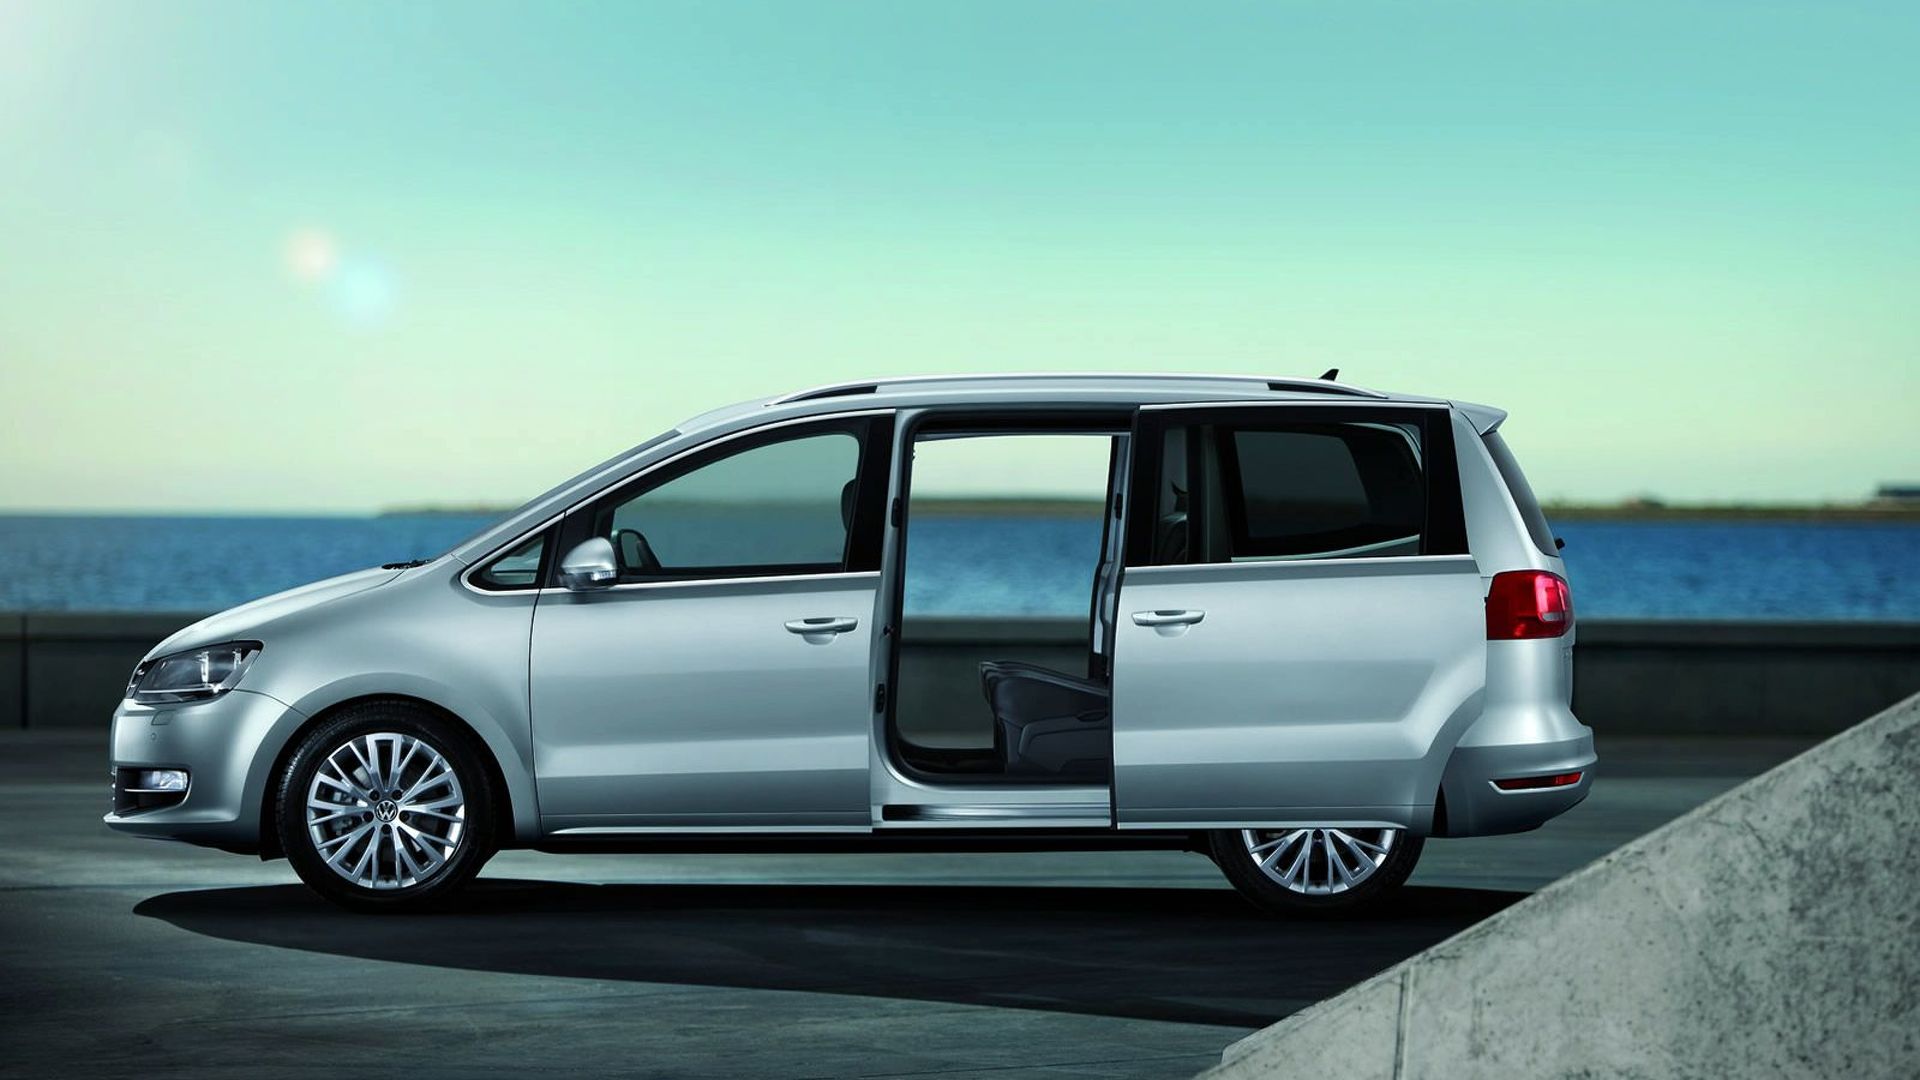 Volkswagen Sharan Pricing Announced in Germany